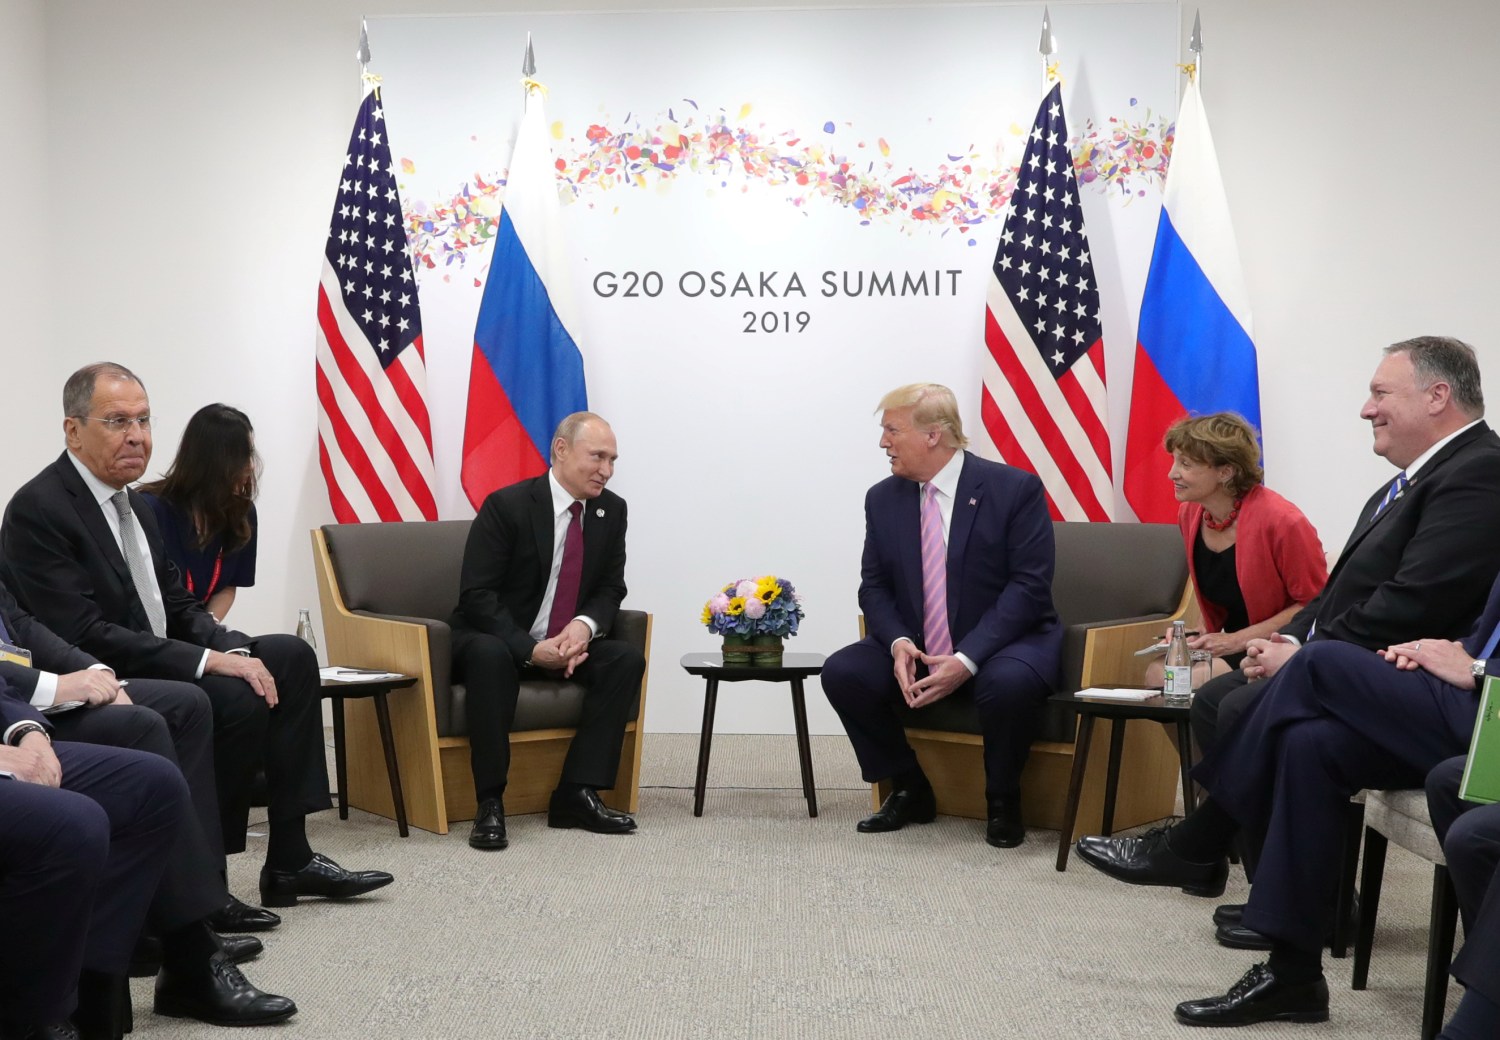 Russia's President Vladimir Putin (3rd L), Russia's Foreign Minister Sergei Lavrov (L), U.S. President Donald Trump (3rd R) and U.S. Secretary of State Mike Pompeo (R) attend a meeting on the sidelines of the G20 summit in Osaka, Japan June 28, 2019. Sputnik/Mikhail Klimentyev/Kremlin via REUTERS  ATTENTION EDITORS - THIS IMAGE WAS PROVIDED BY A THIRD PARTY.